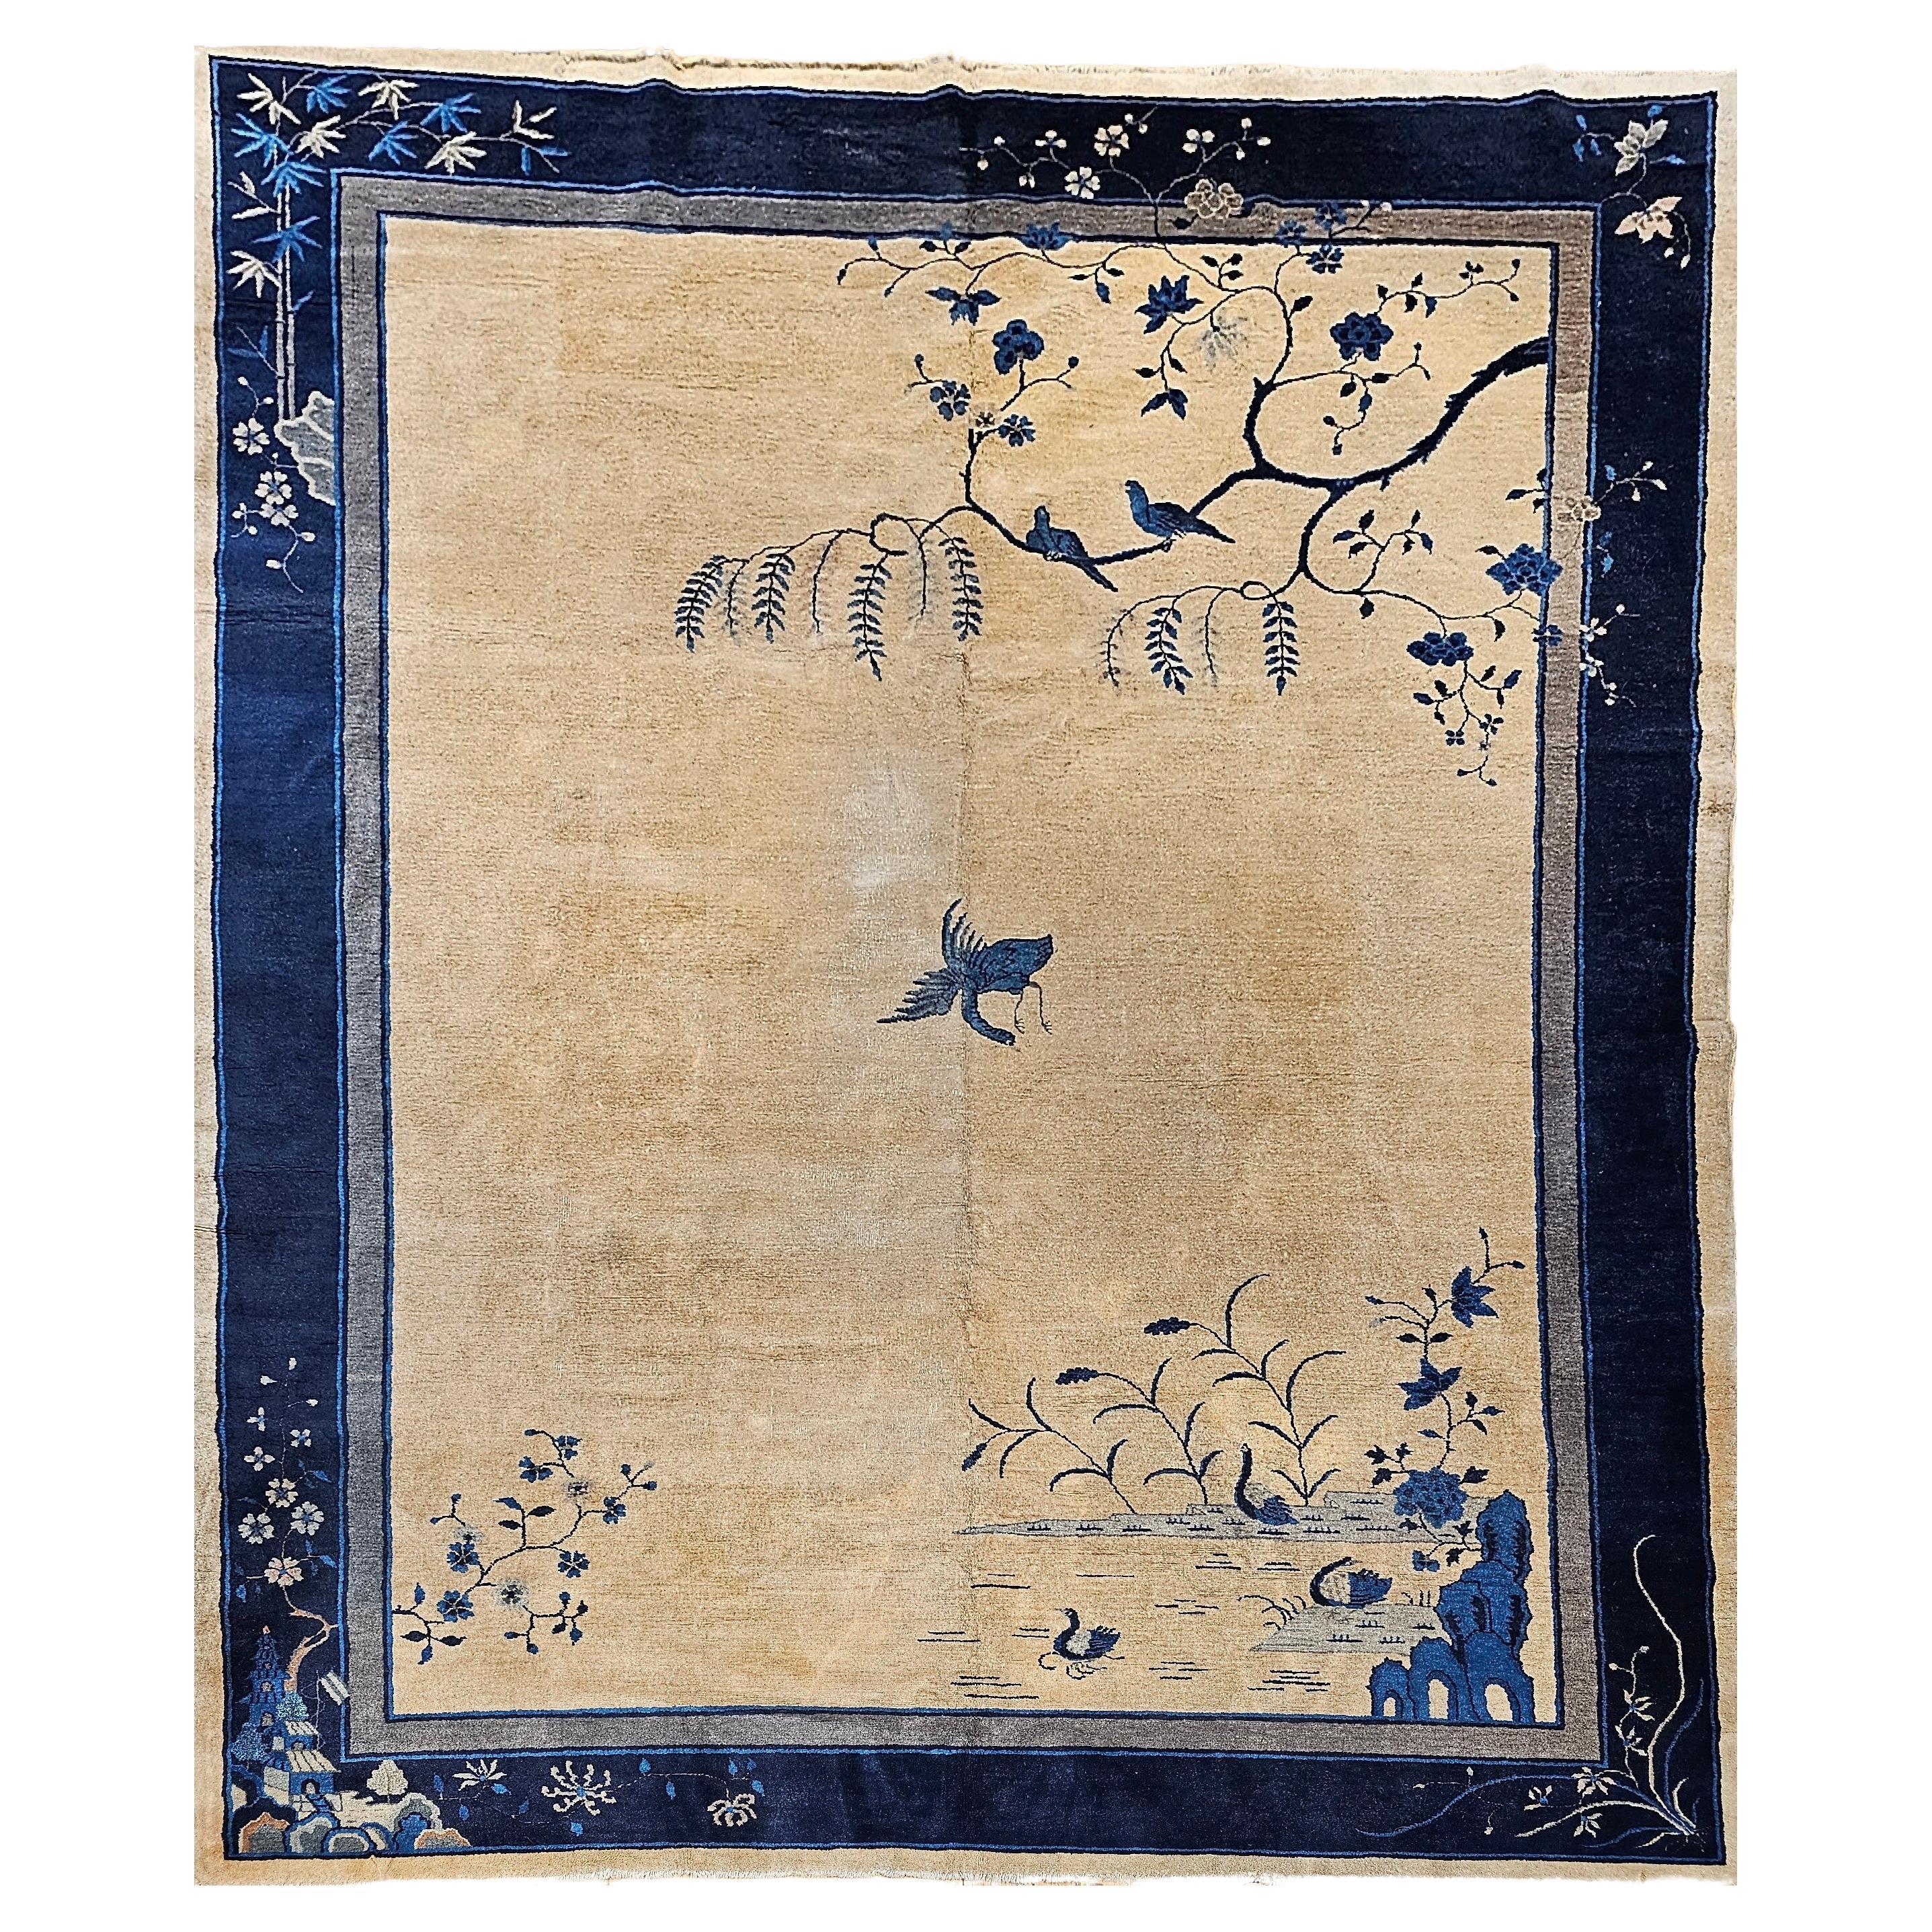 Vintage Art Deco Chinese Rug with Cranes, Pagoda, Mountains in Wheat, Blue, Navy